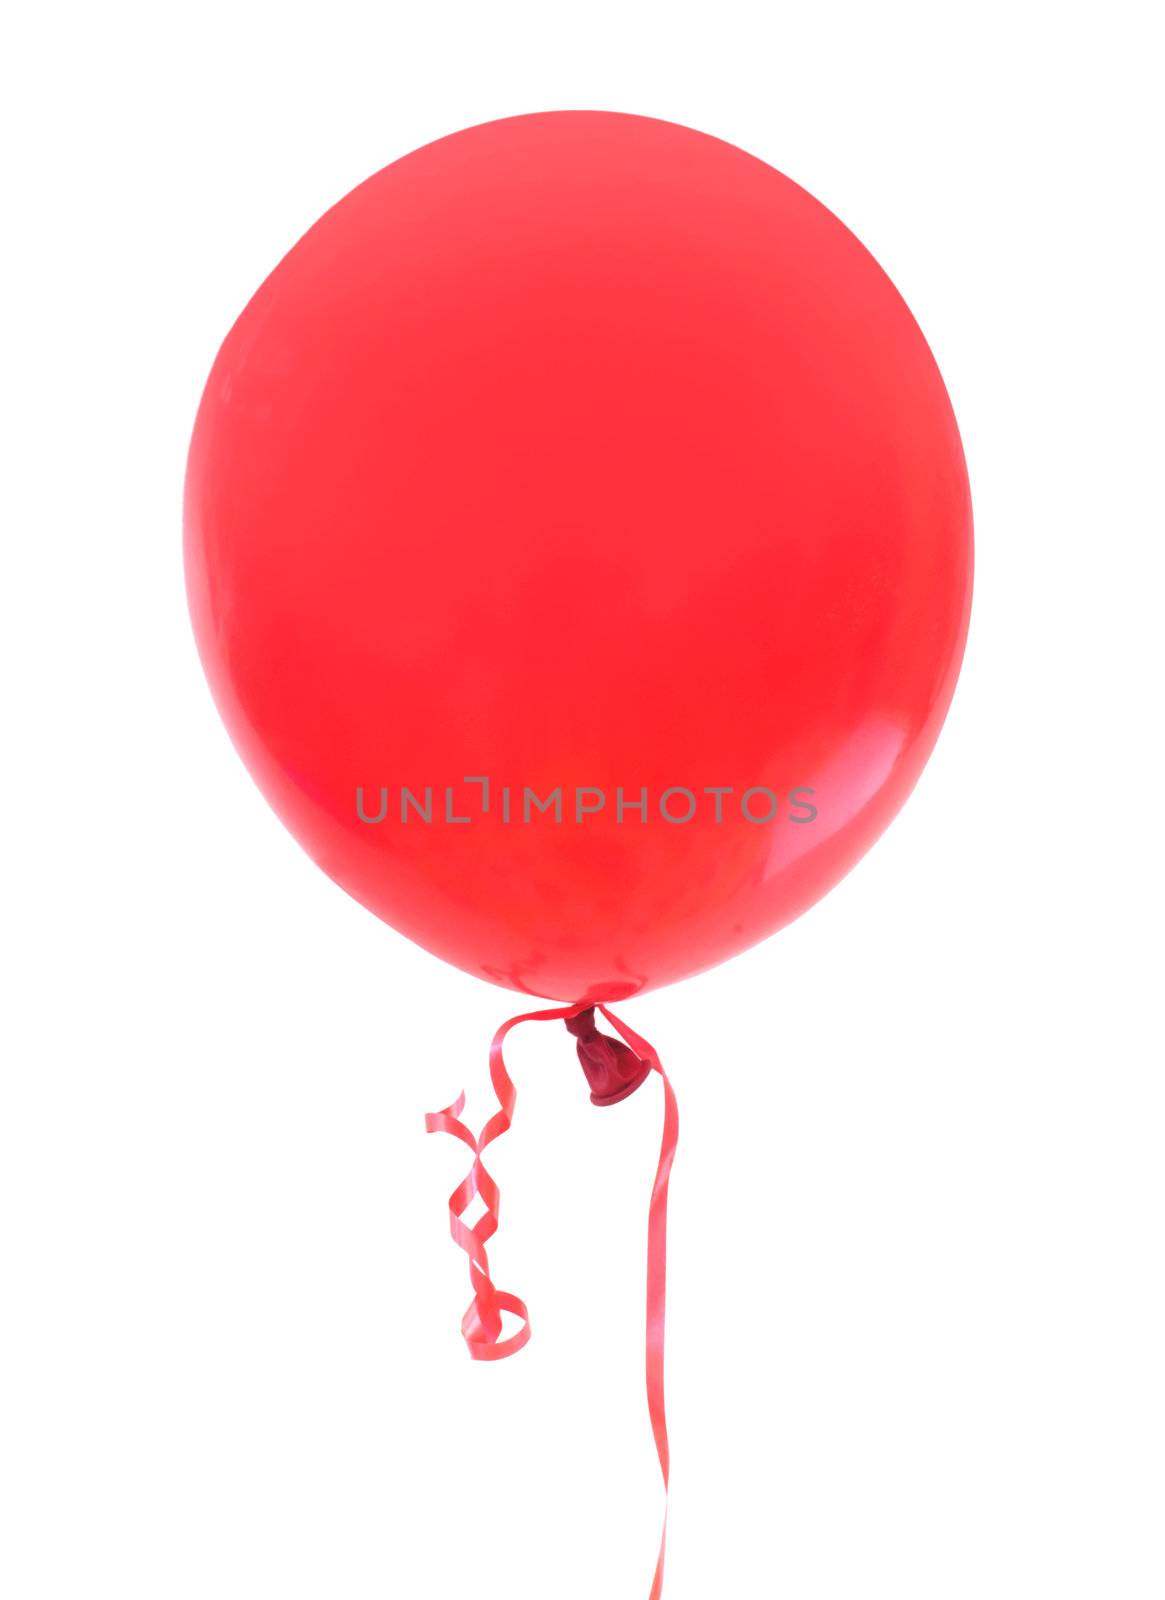 Red balloon by unikpix